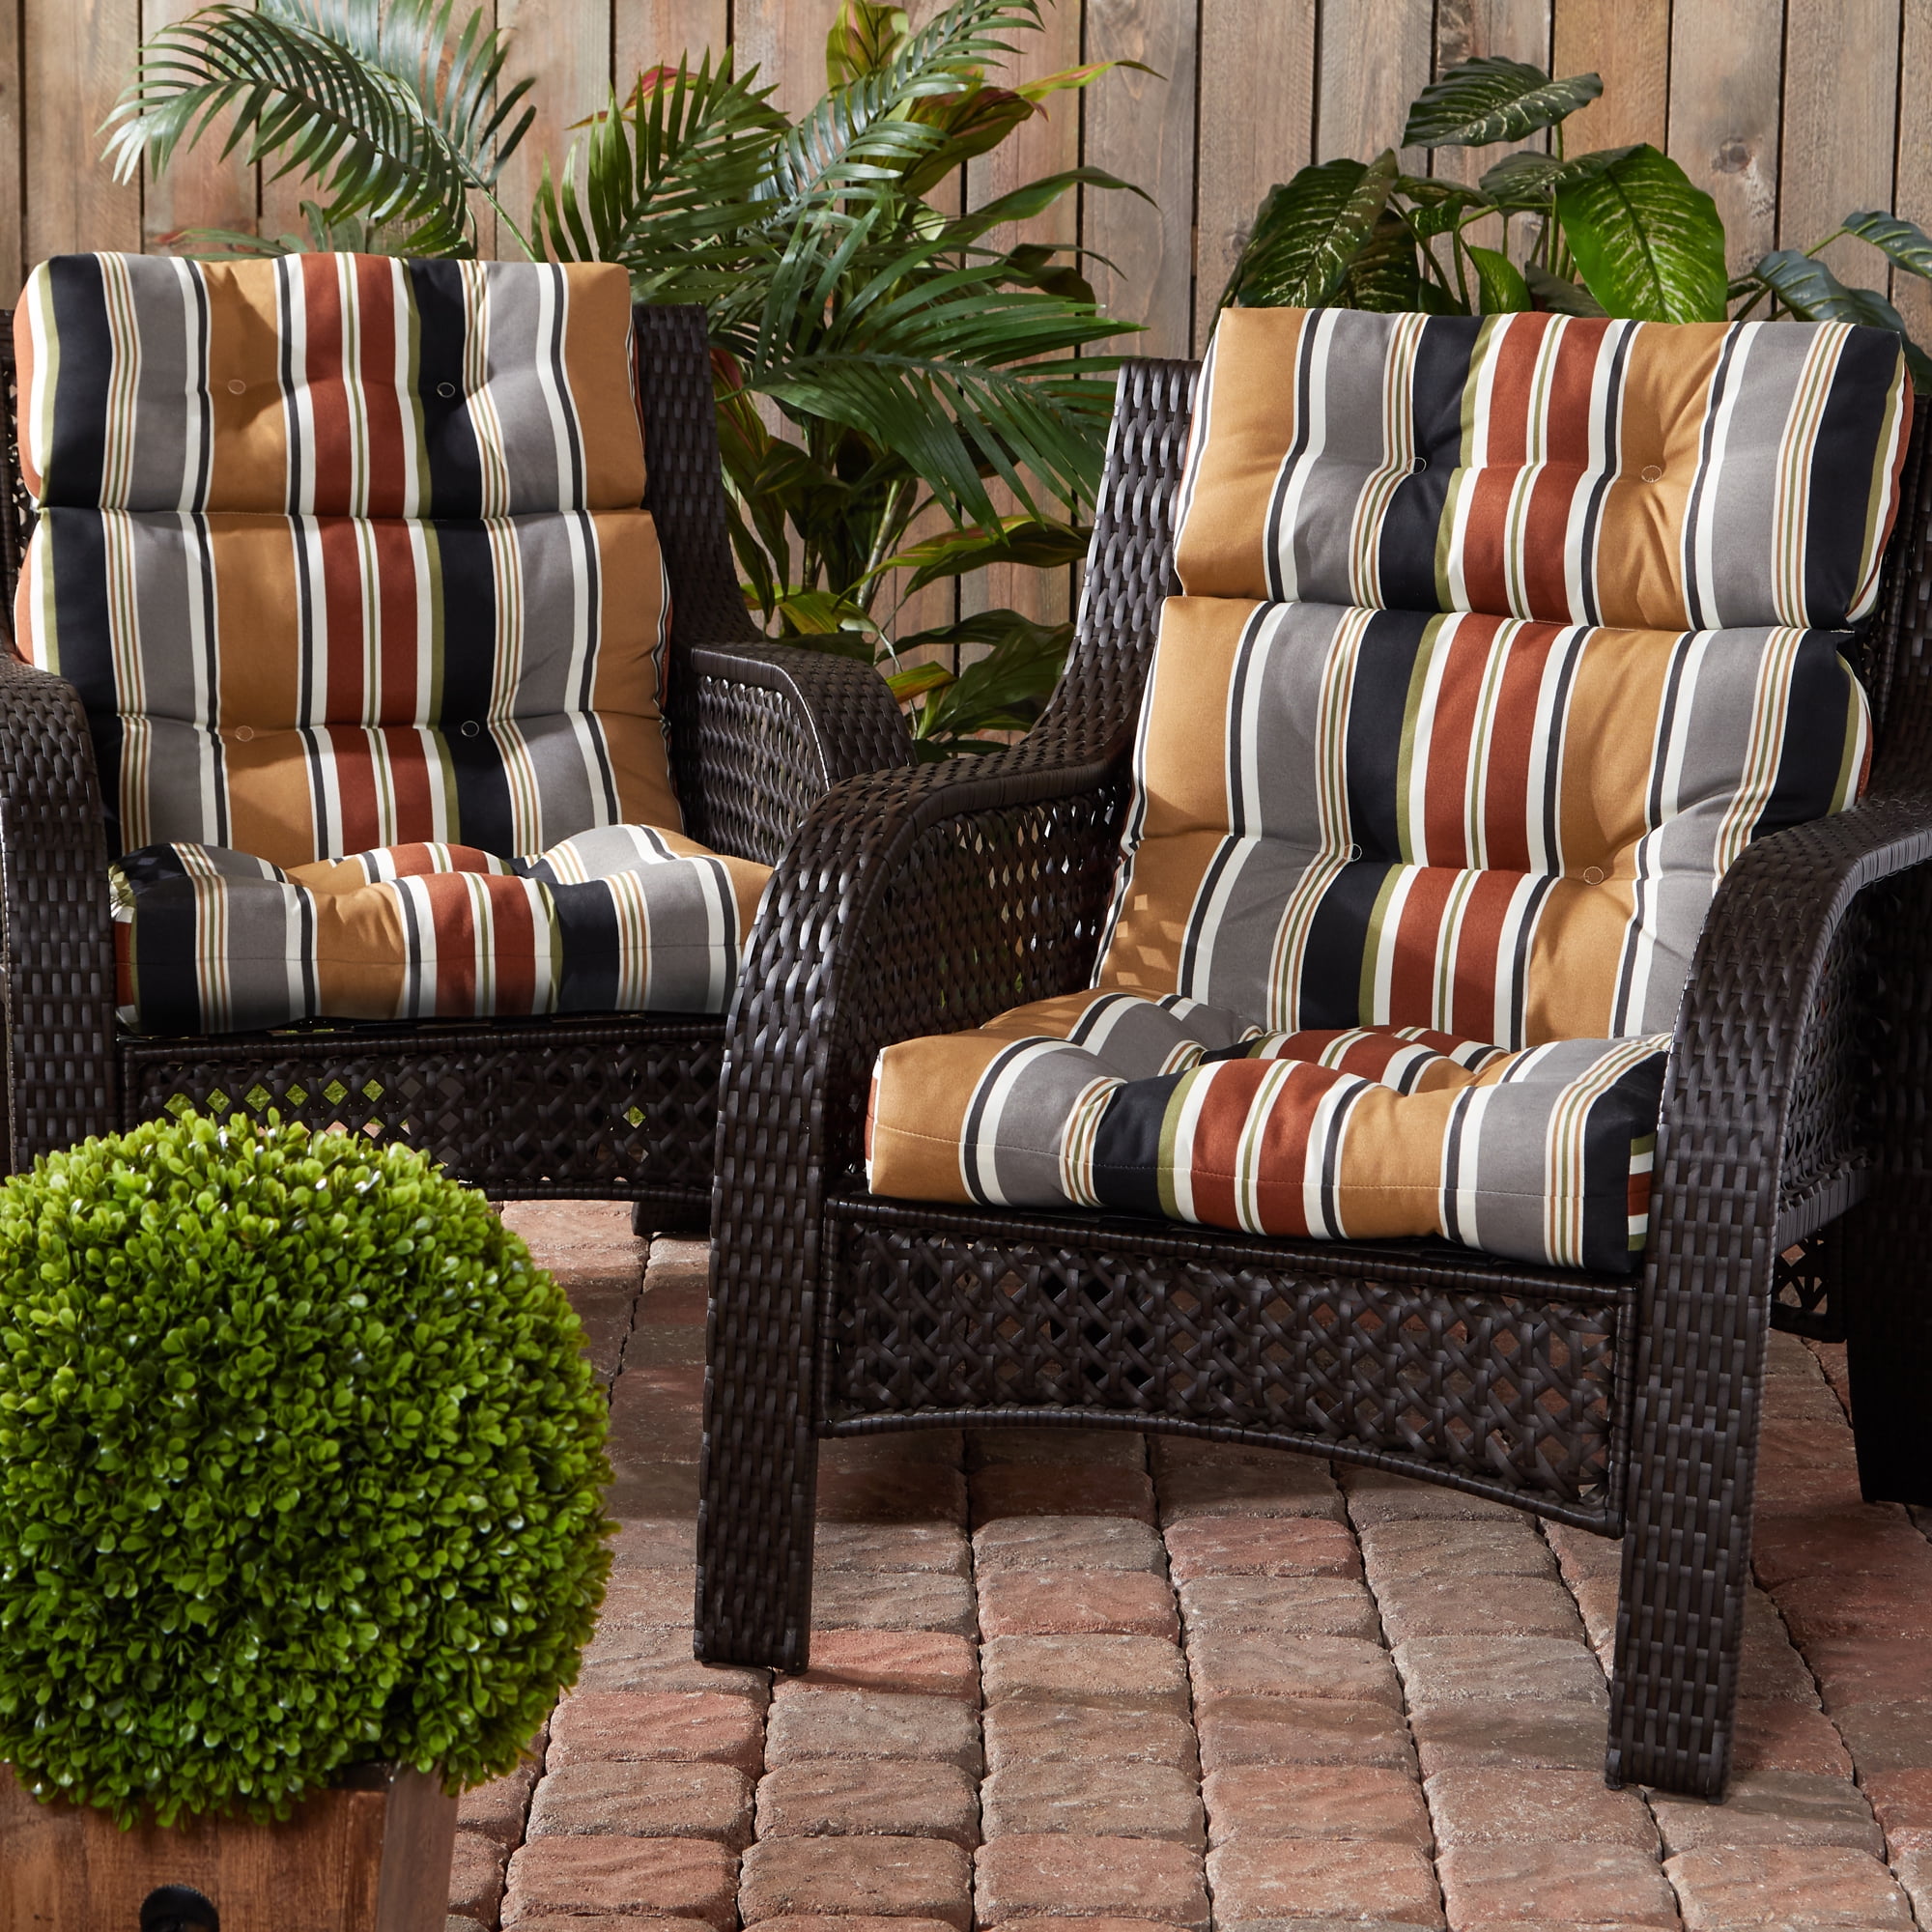 Brick Stripe Outdoor High Back Chair, Tufted Outdoor High Back Patio Chair Cushion